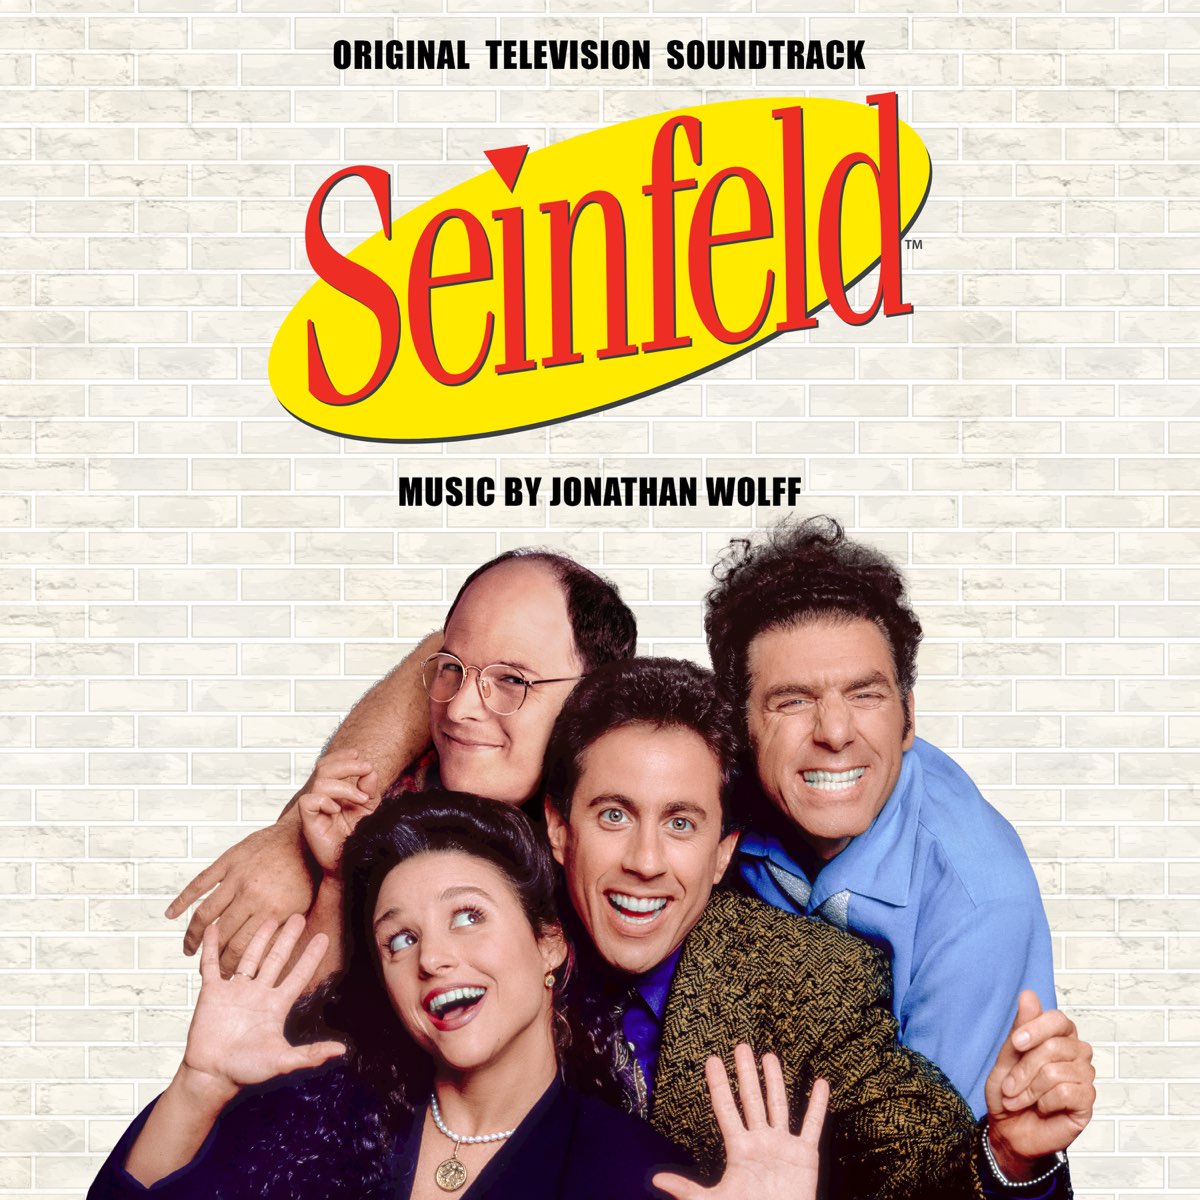 Jonathan Wolff - the Seinfeld Theme Song